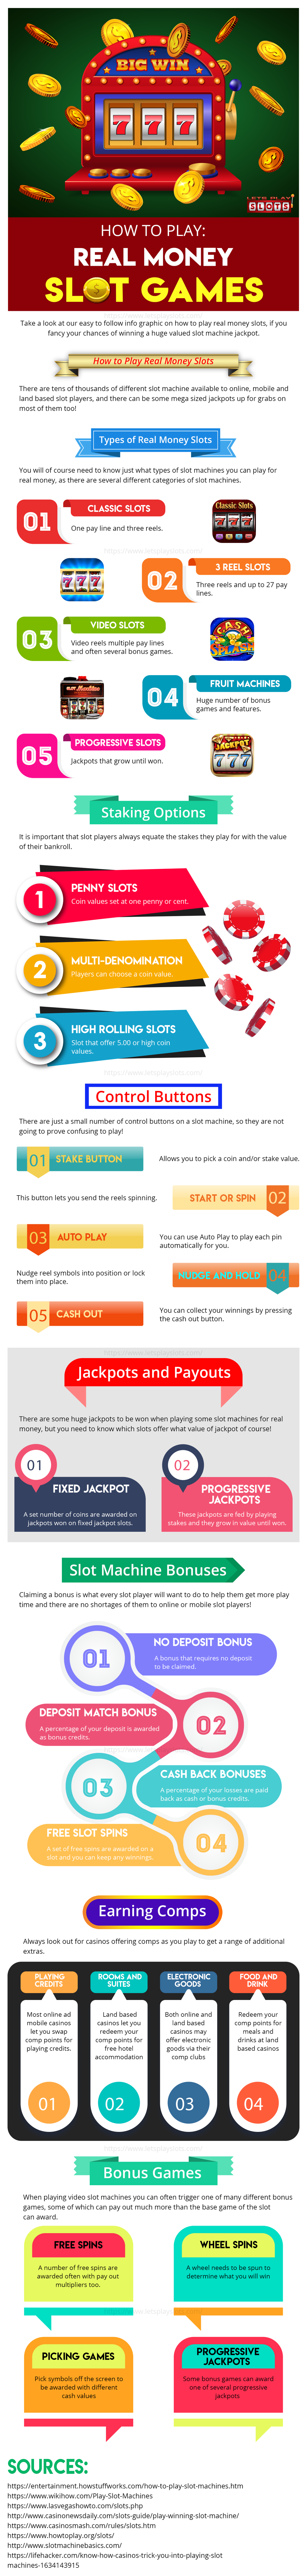 Infographic on how to place real money slots